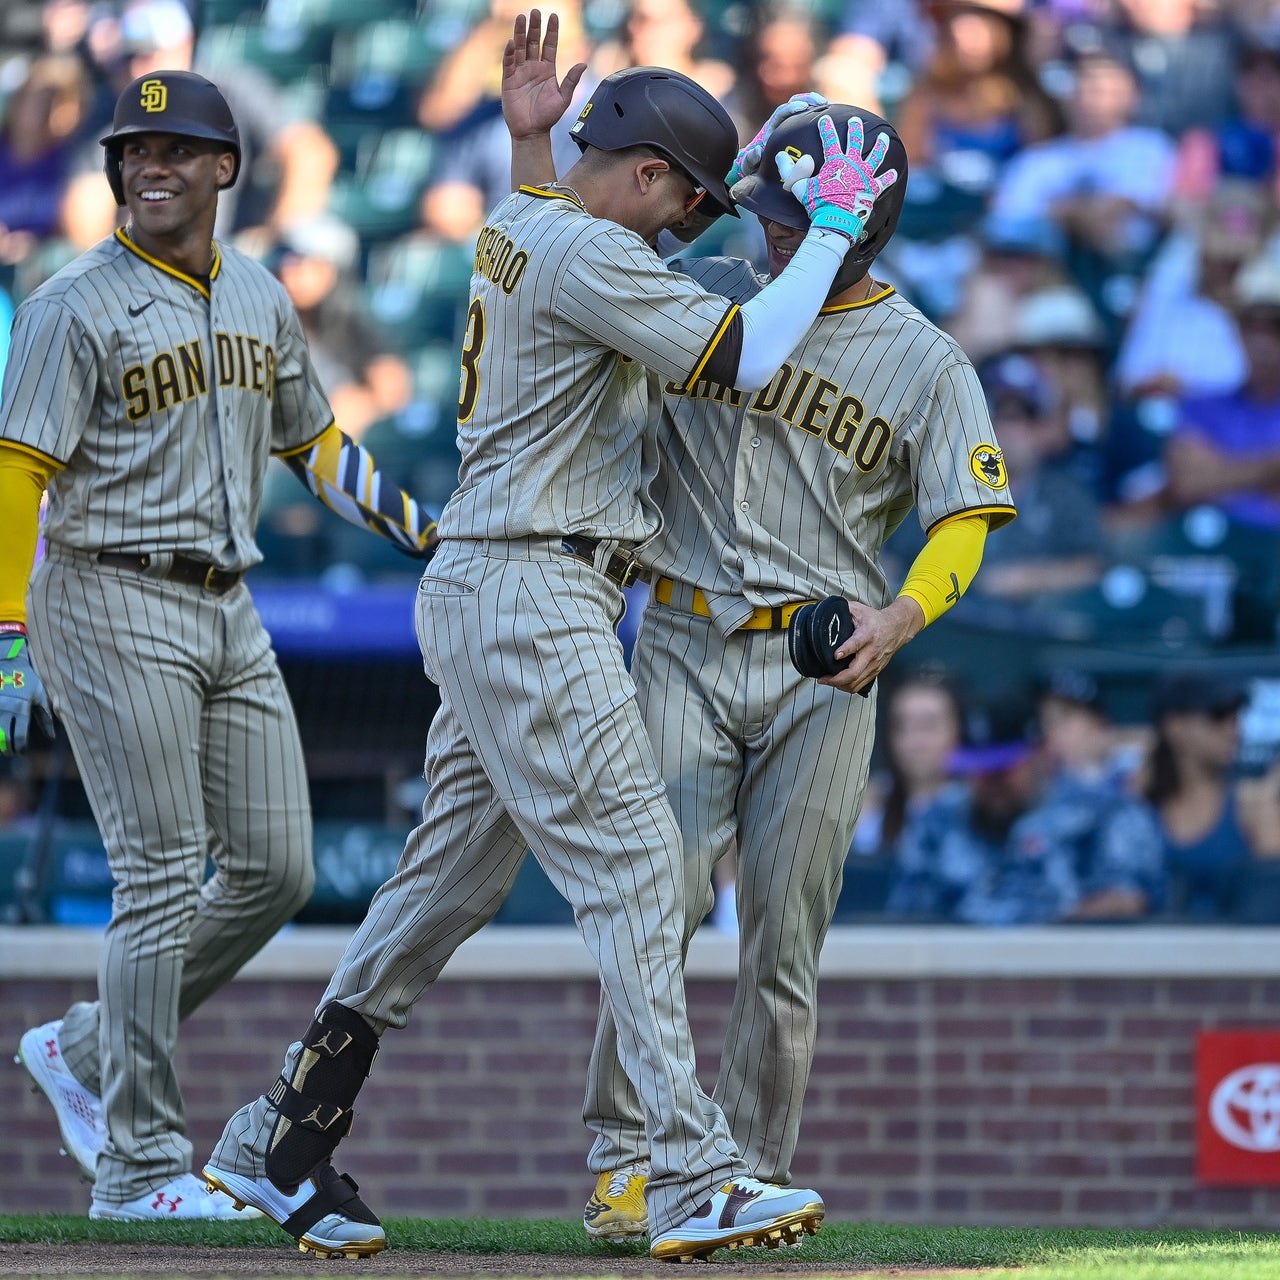 Padres-Phillies National League Championship Series Game 3 odds, lines, bet  - Sports Illustrated